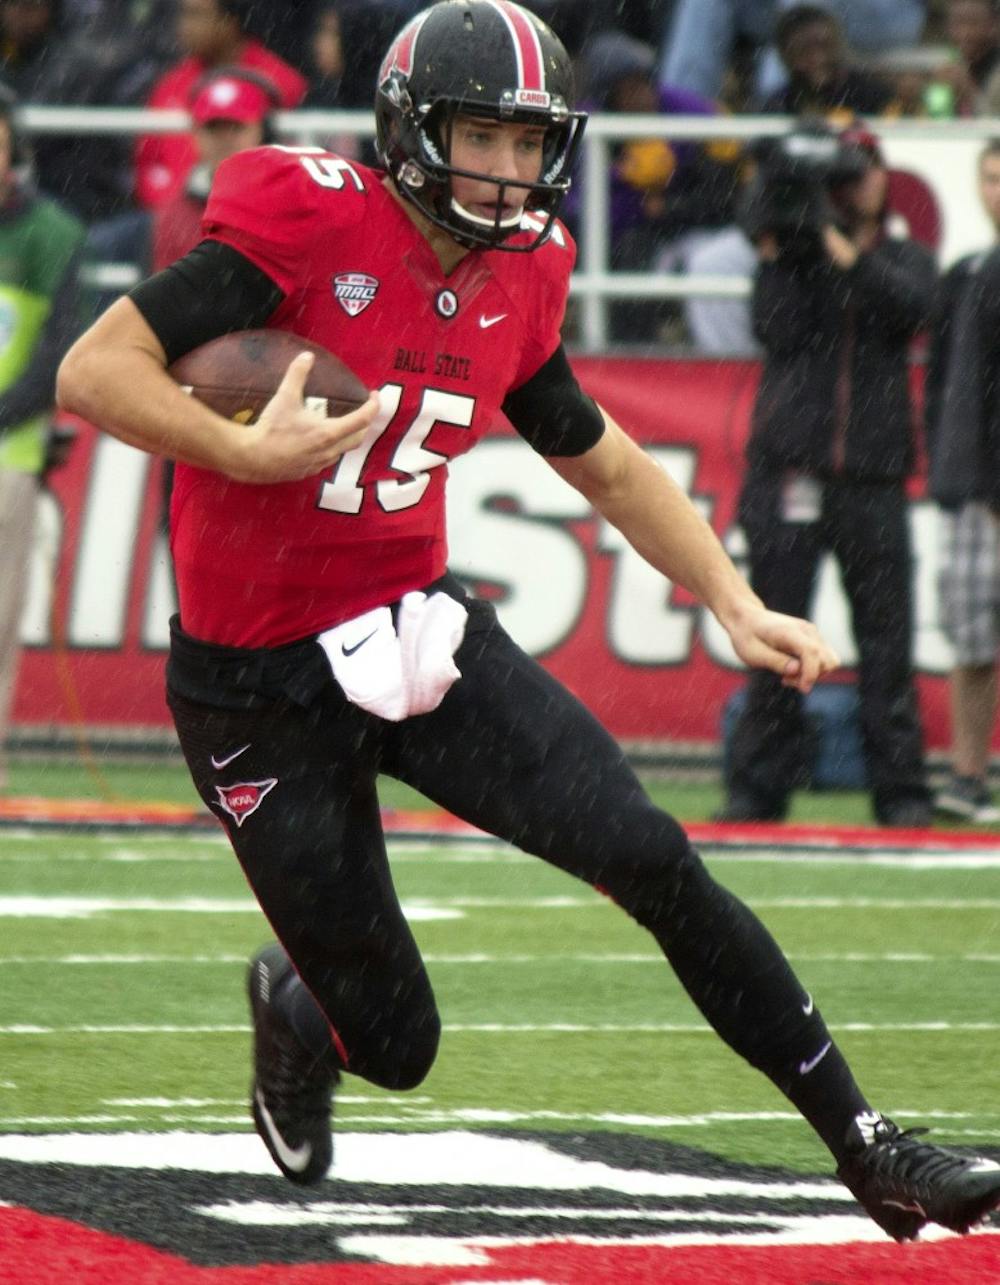 Riley Neal, Ball State’s freshman quarterback, runs the ball in a game against Central Michigan University on Oct. 24 at Scheumann Stadium.